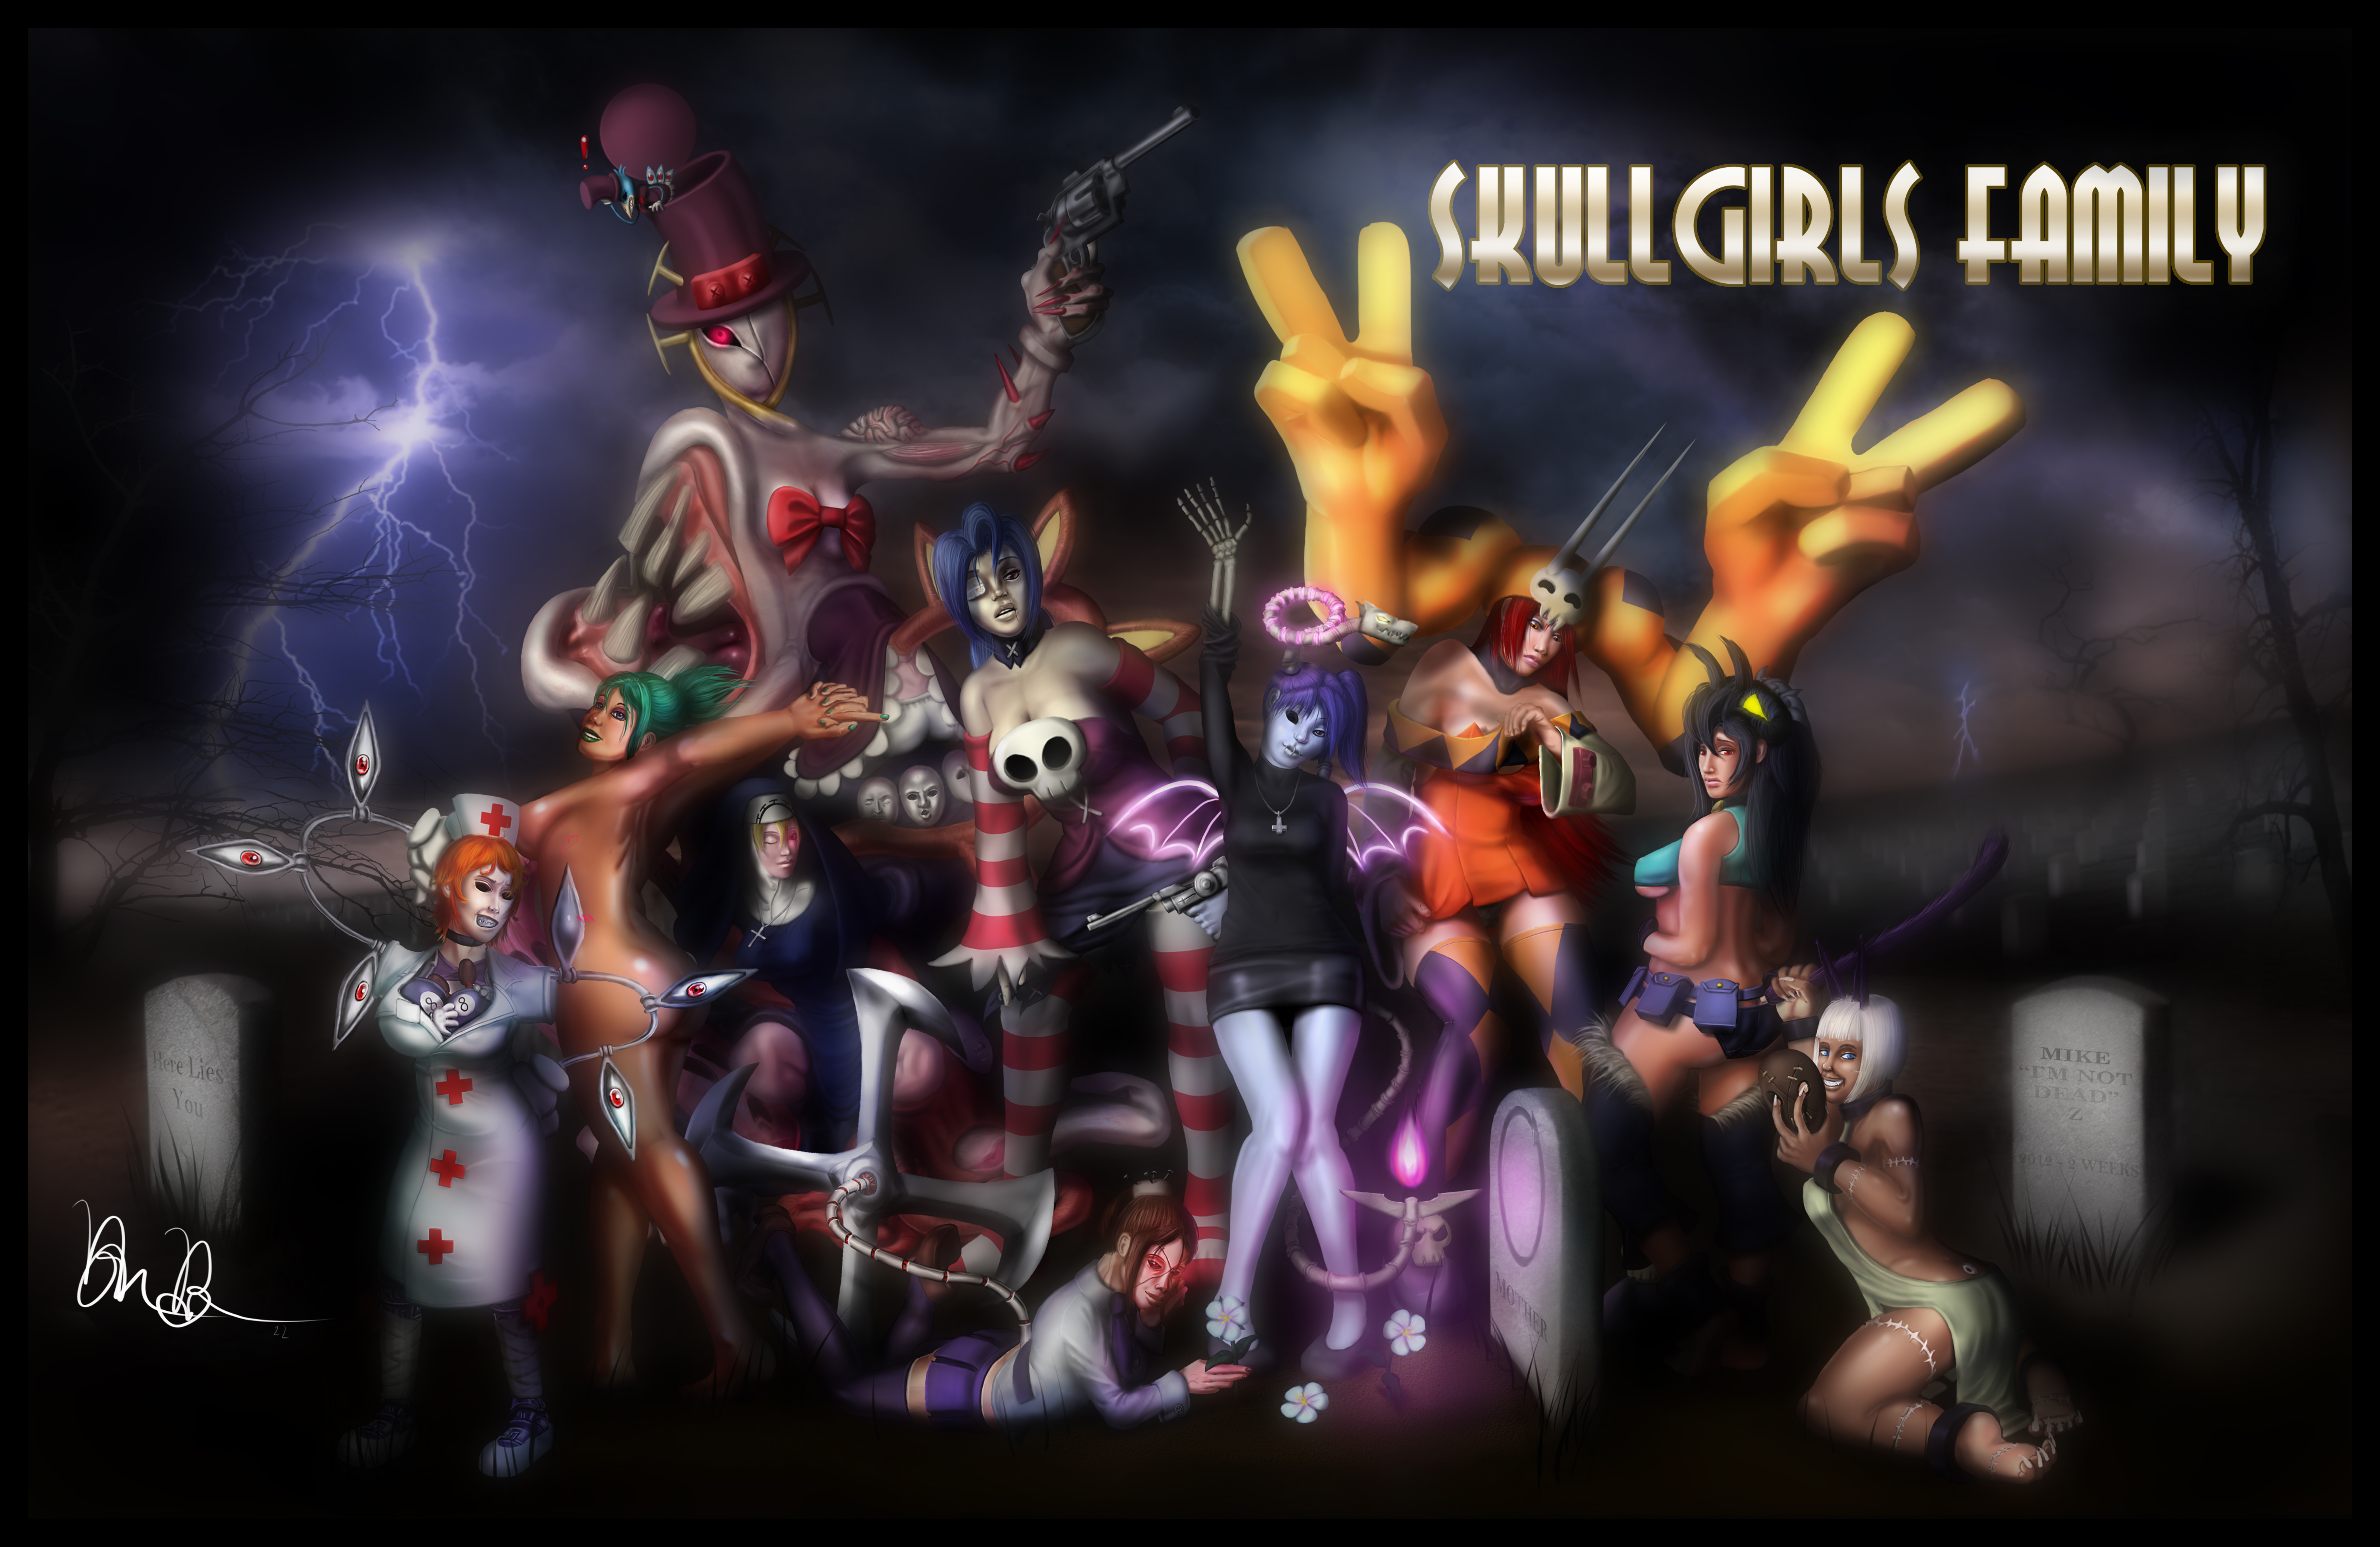 skullgirls_clothes_swap_family_portrait__poster__by_drsusredfish-d6n0cpf.jpg